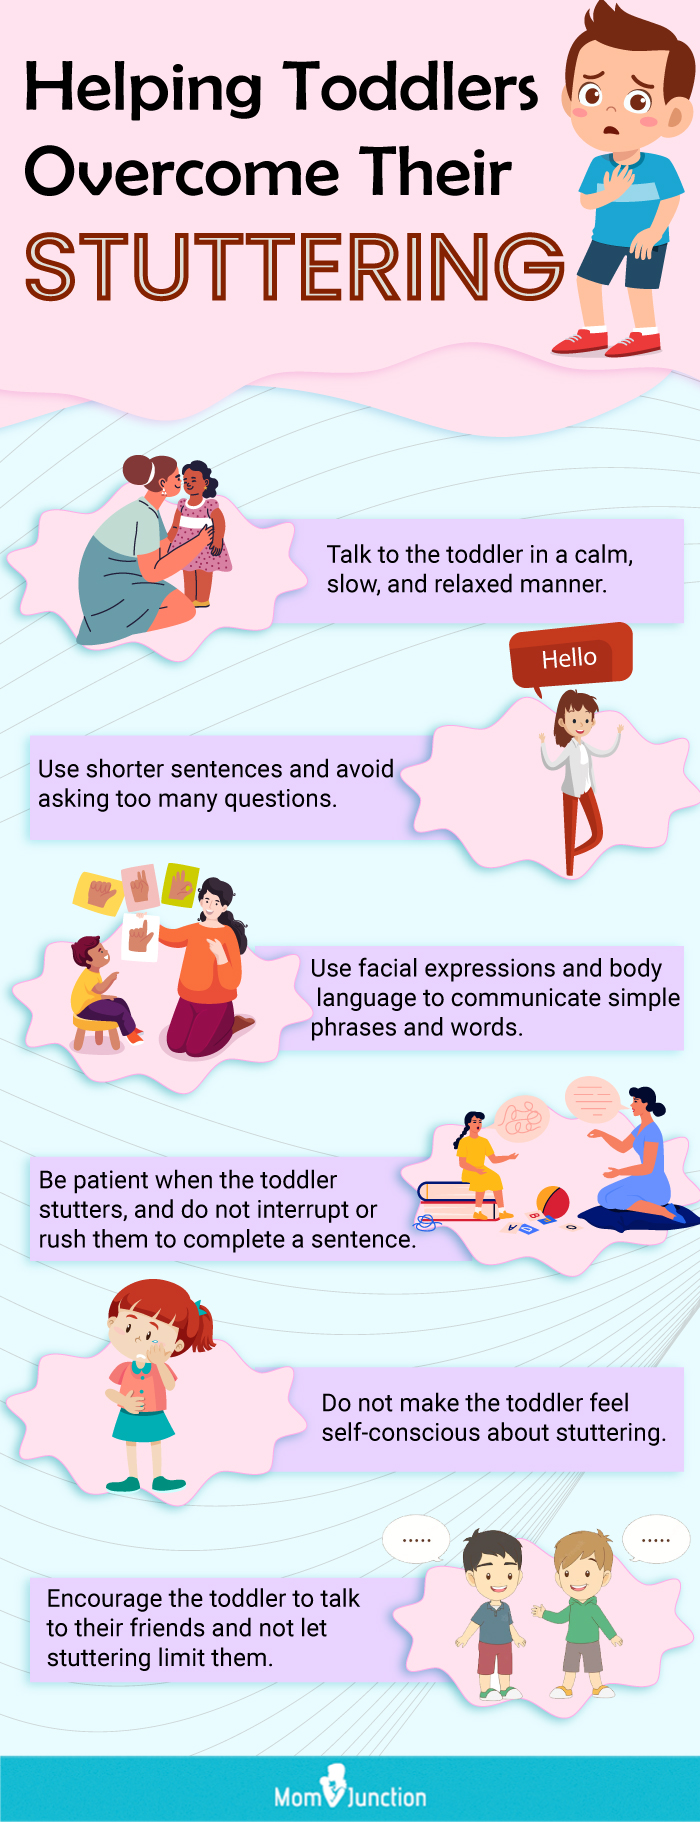 how can parents help a toddler who stutters (infographic)